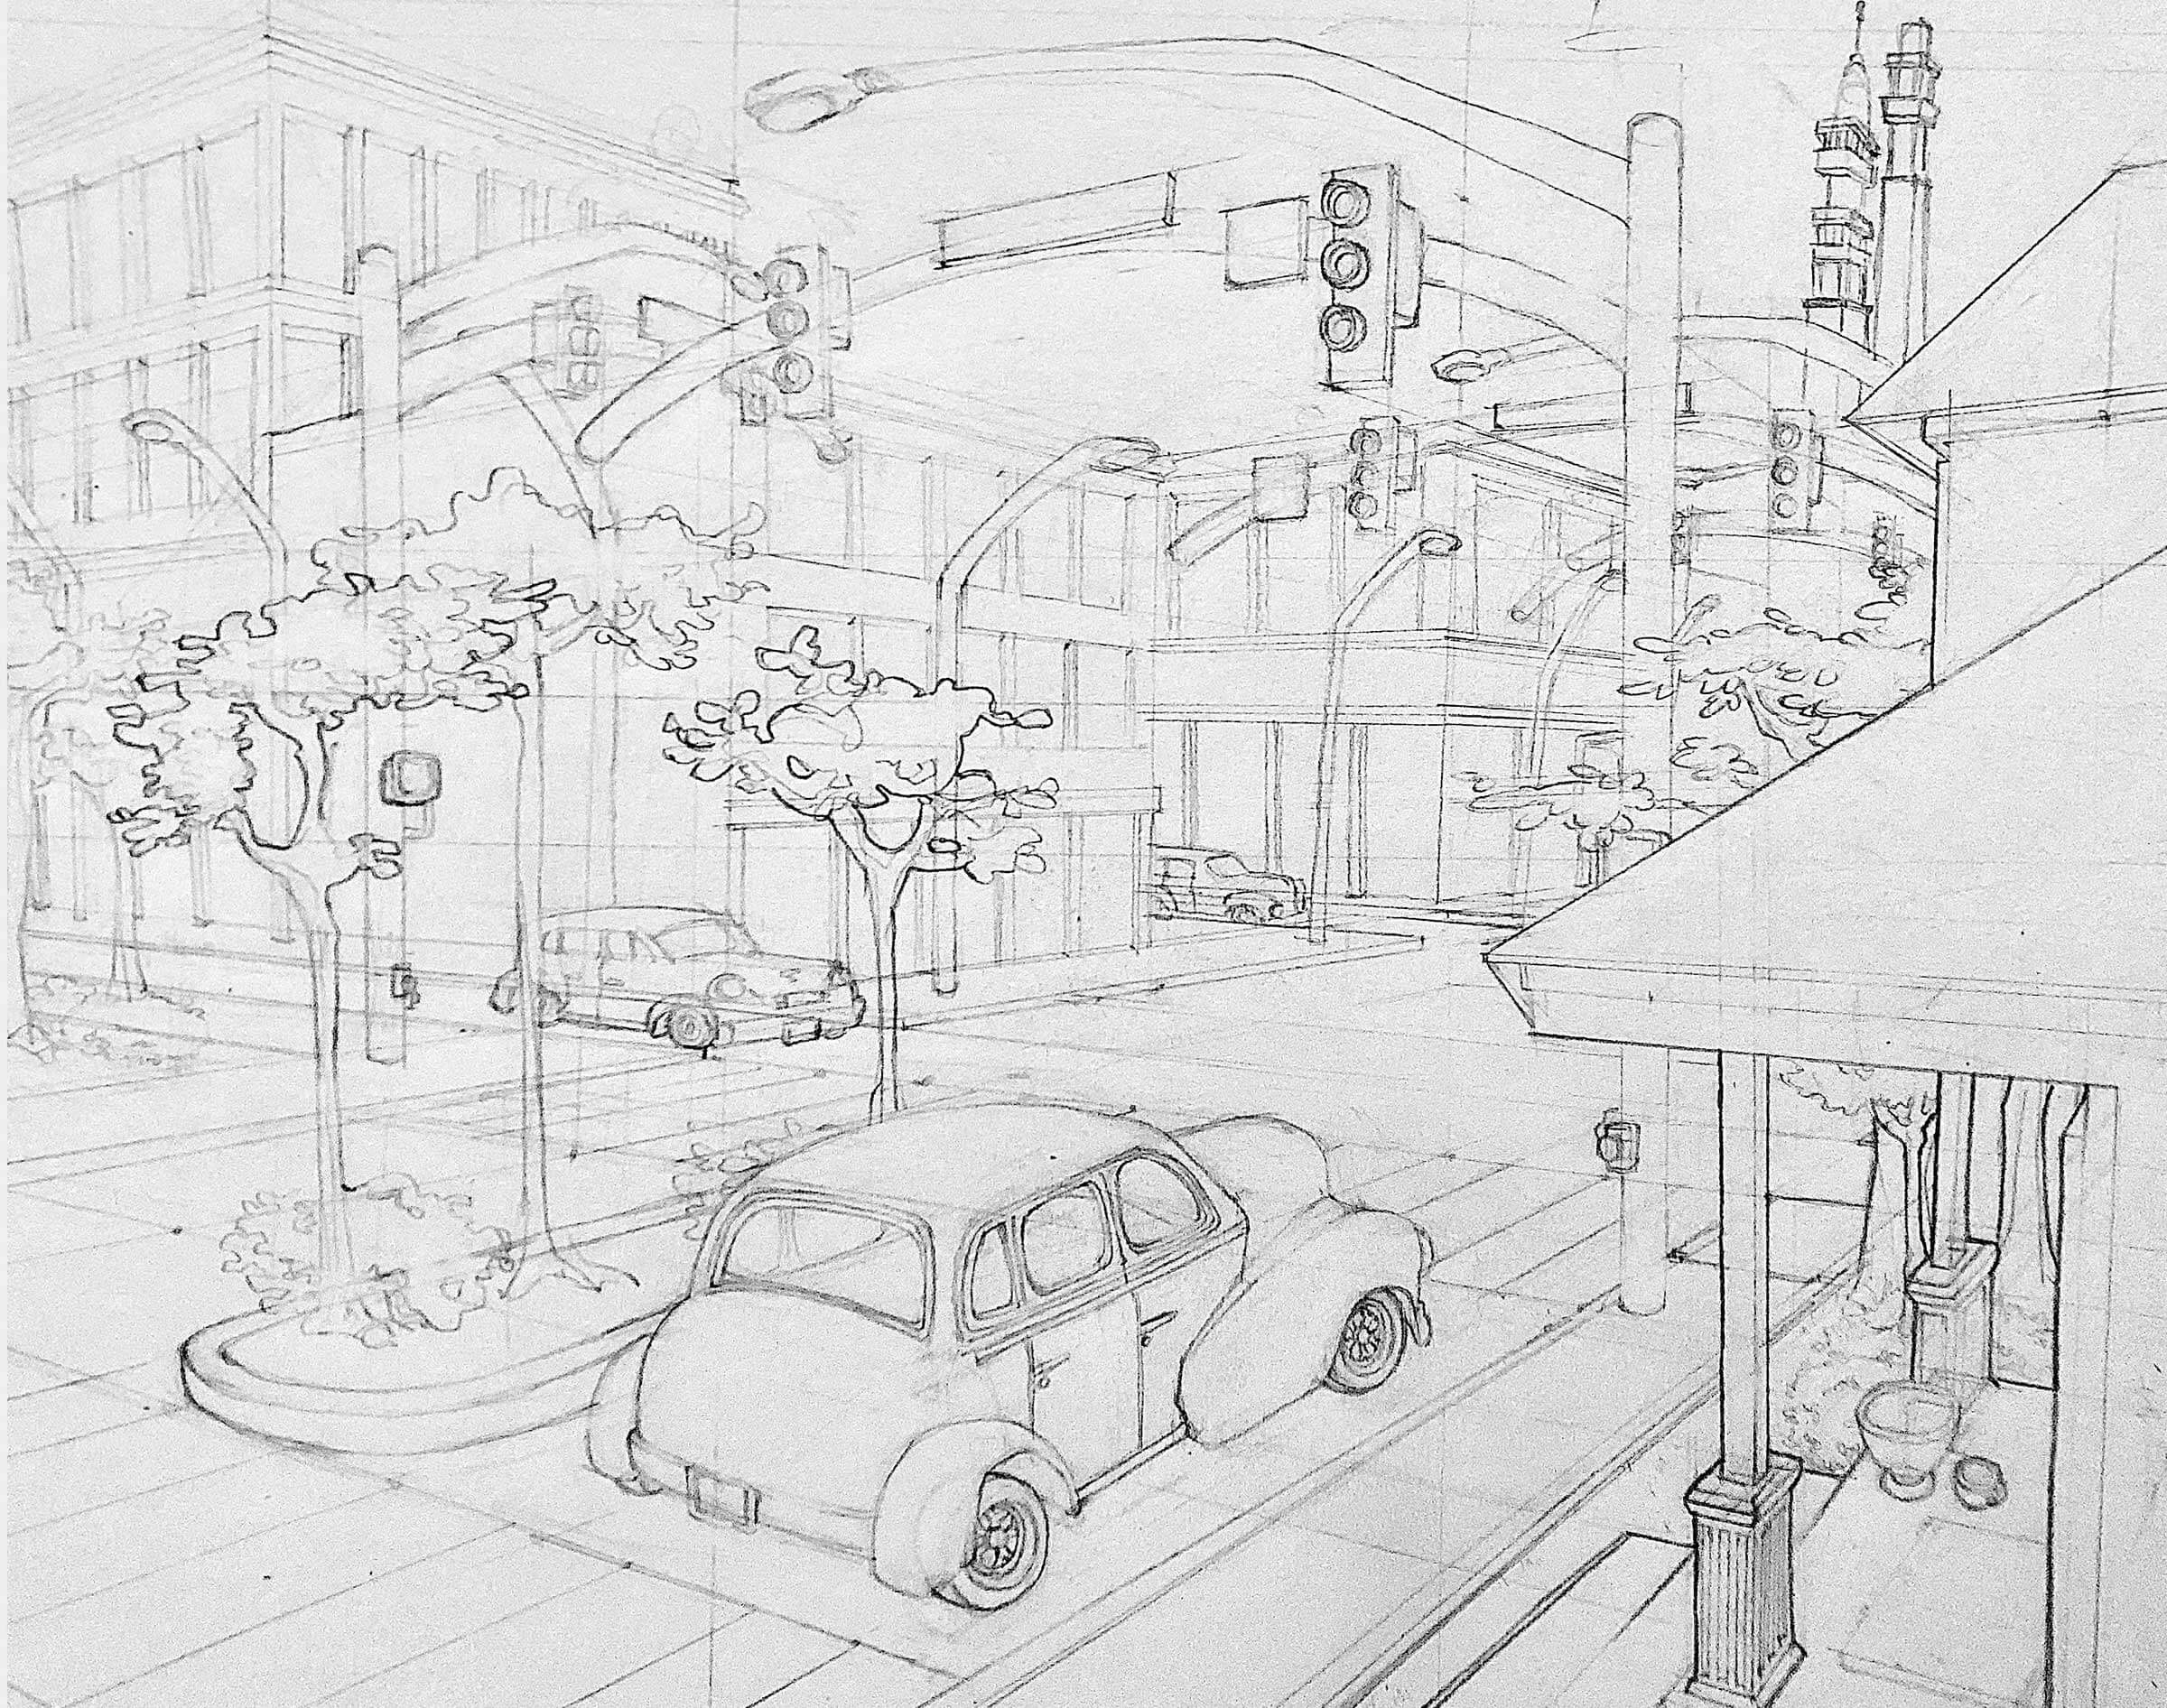 A drawing of a small town center with a few cars driving on the roads.